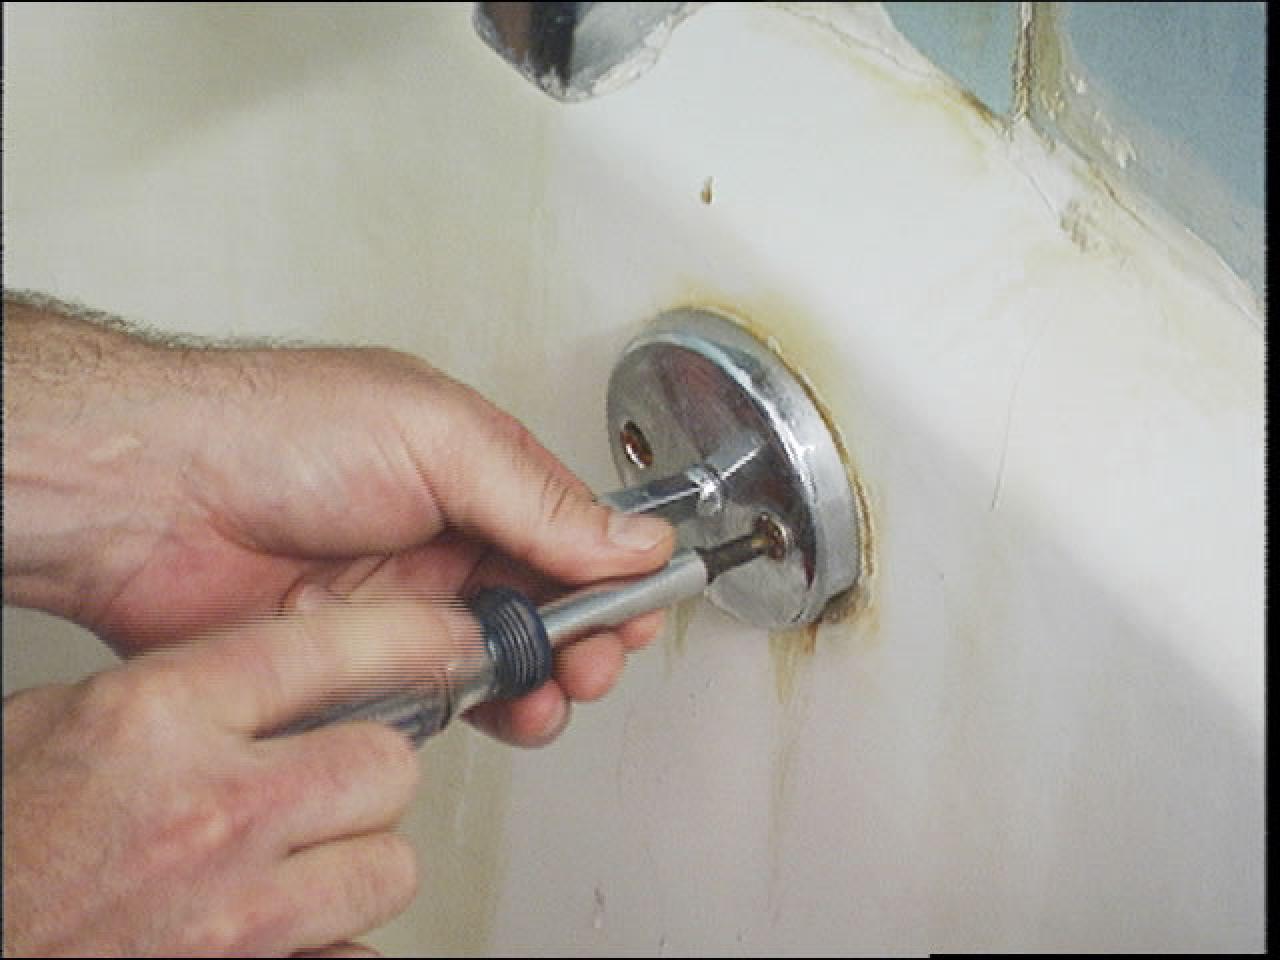 Unclog A Bathtub Using The Trip Lever, How To Unclog Hair Out Of A Bathtub Drain